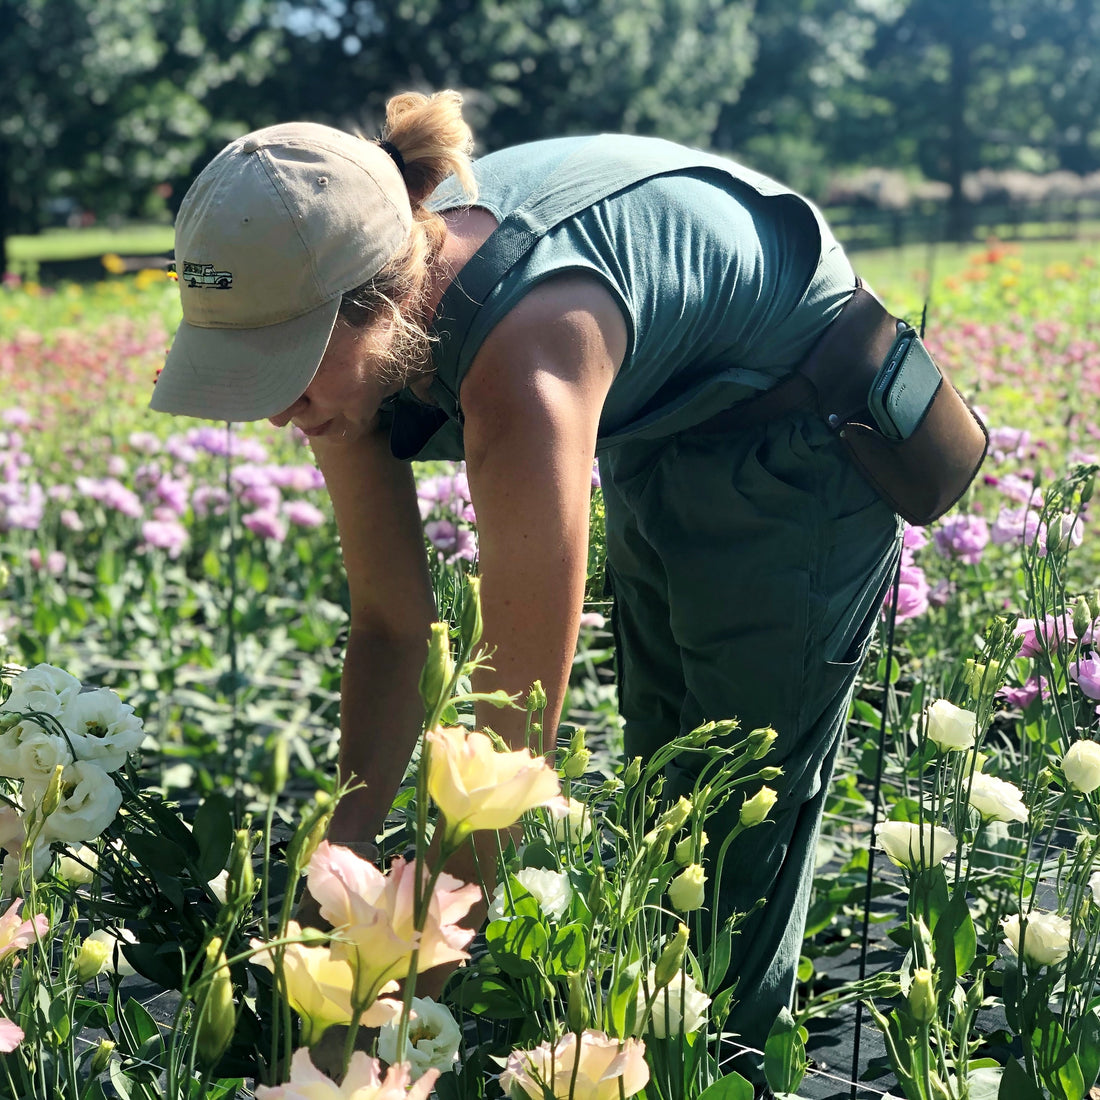 Natasha McCrary of 1818 Farms Featured on "The Flower Podcast"